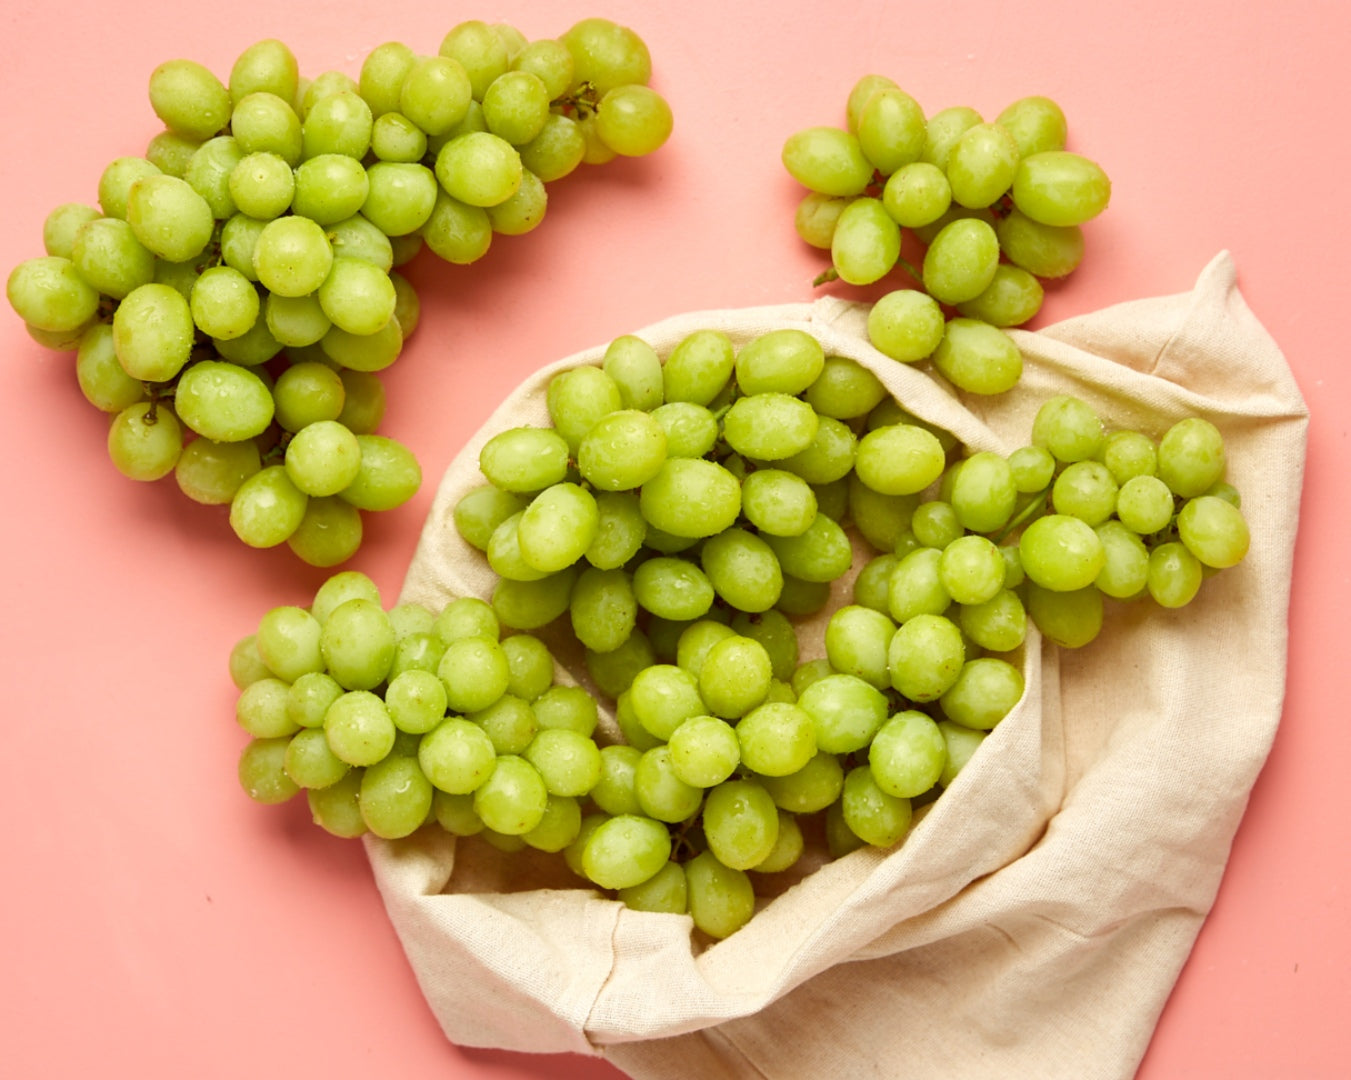 Bunches of Menindee White Seedless Grapes with a net bag on a pink background